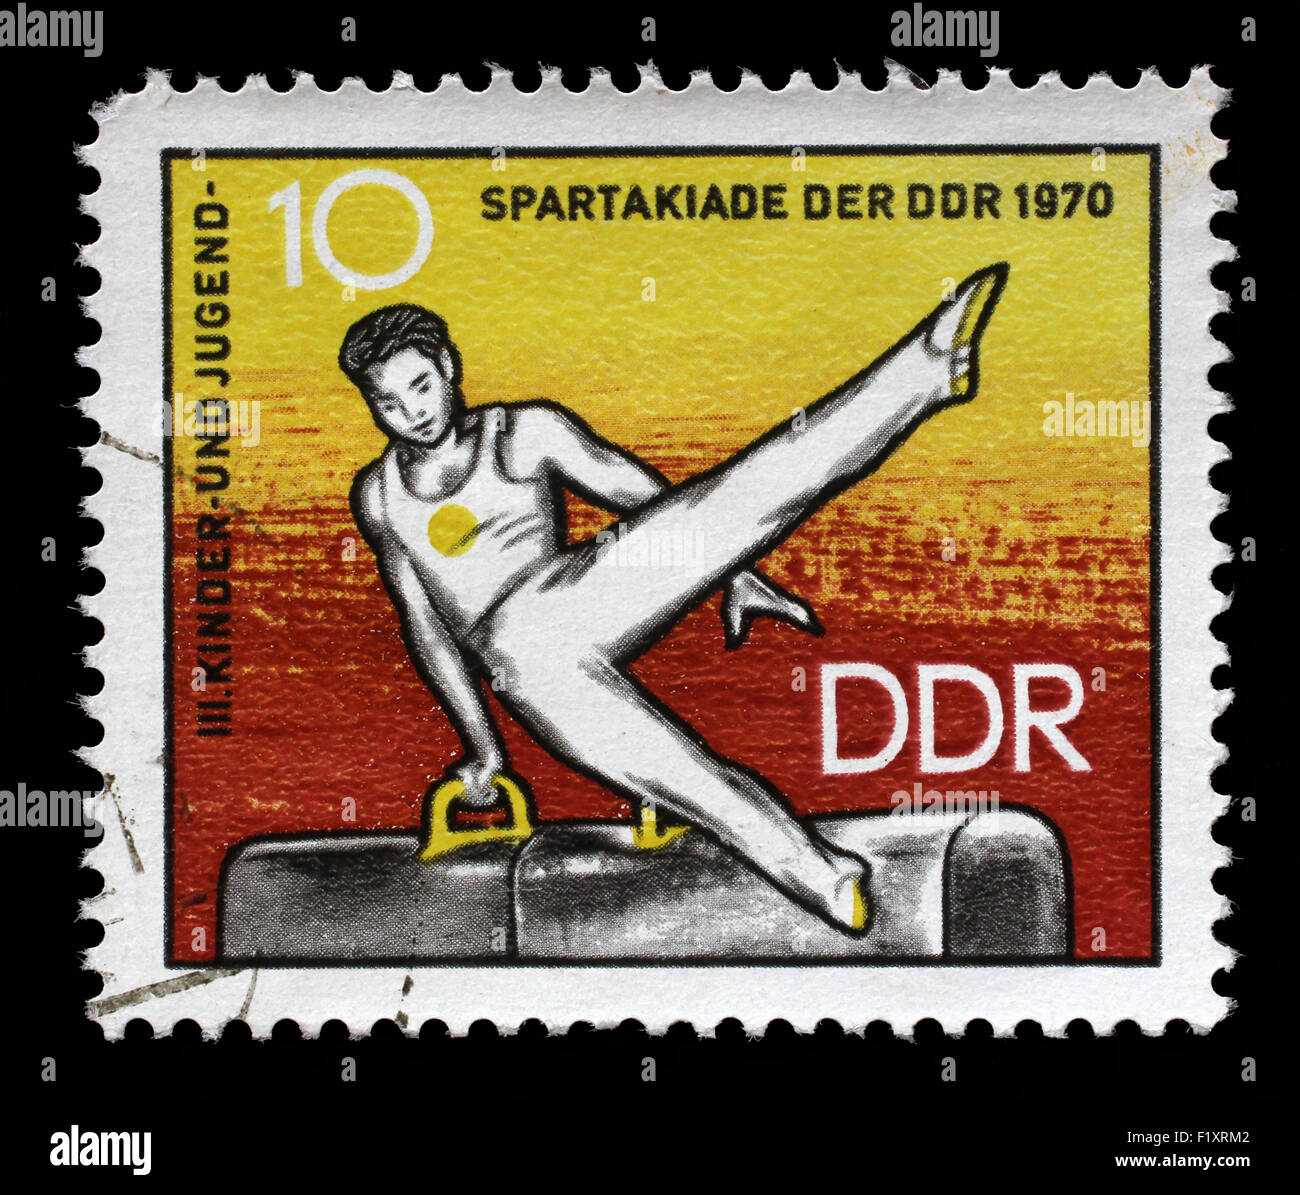 Stamp printed in GDR shows Athlete on Pommel Horse, 3rd Childrens' and Youths' Spartakiad, circa 1970 Stock Photo